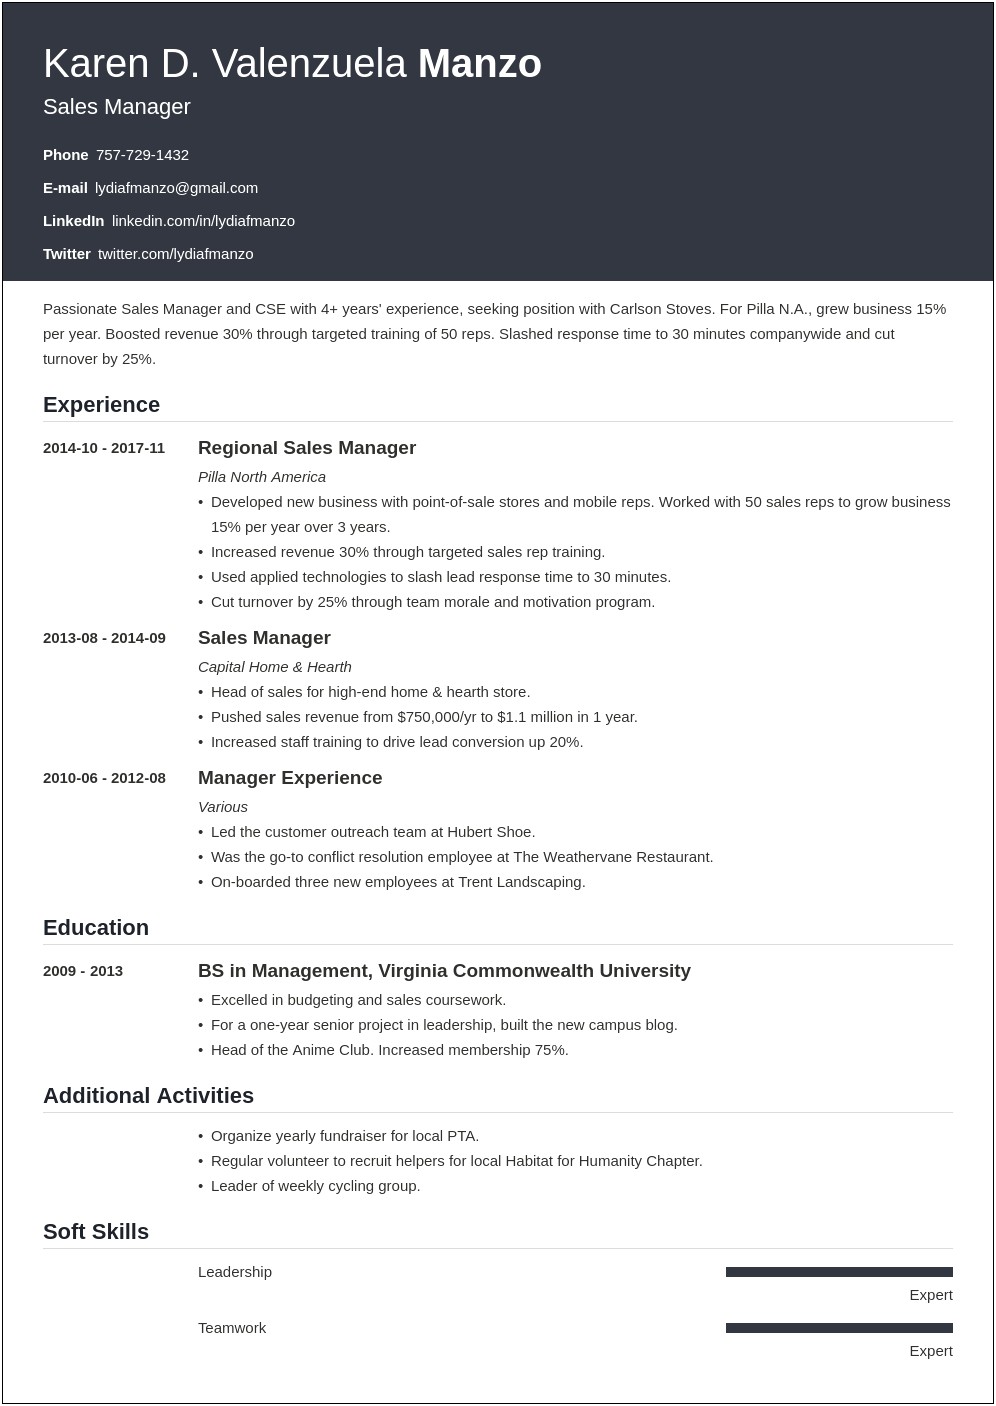 Best Type Of Resume For Management Position